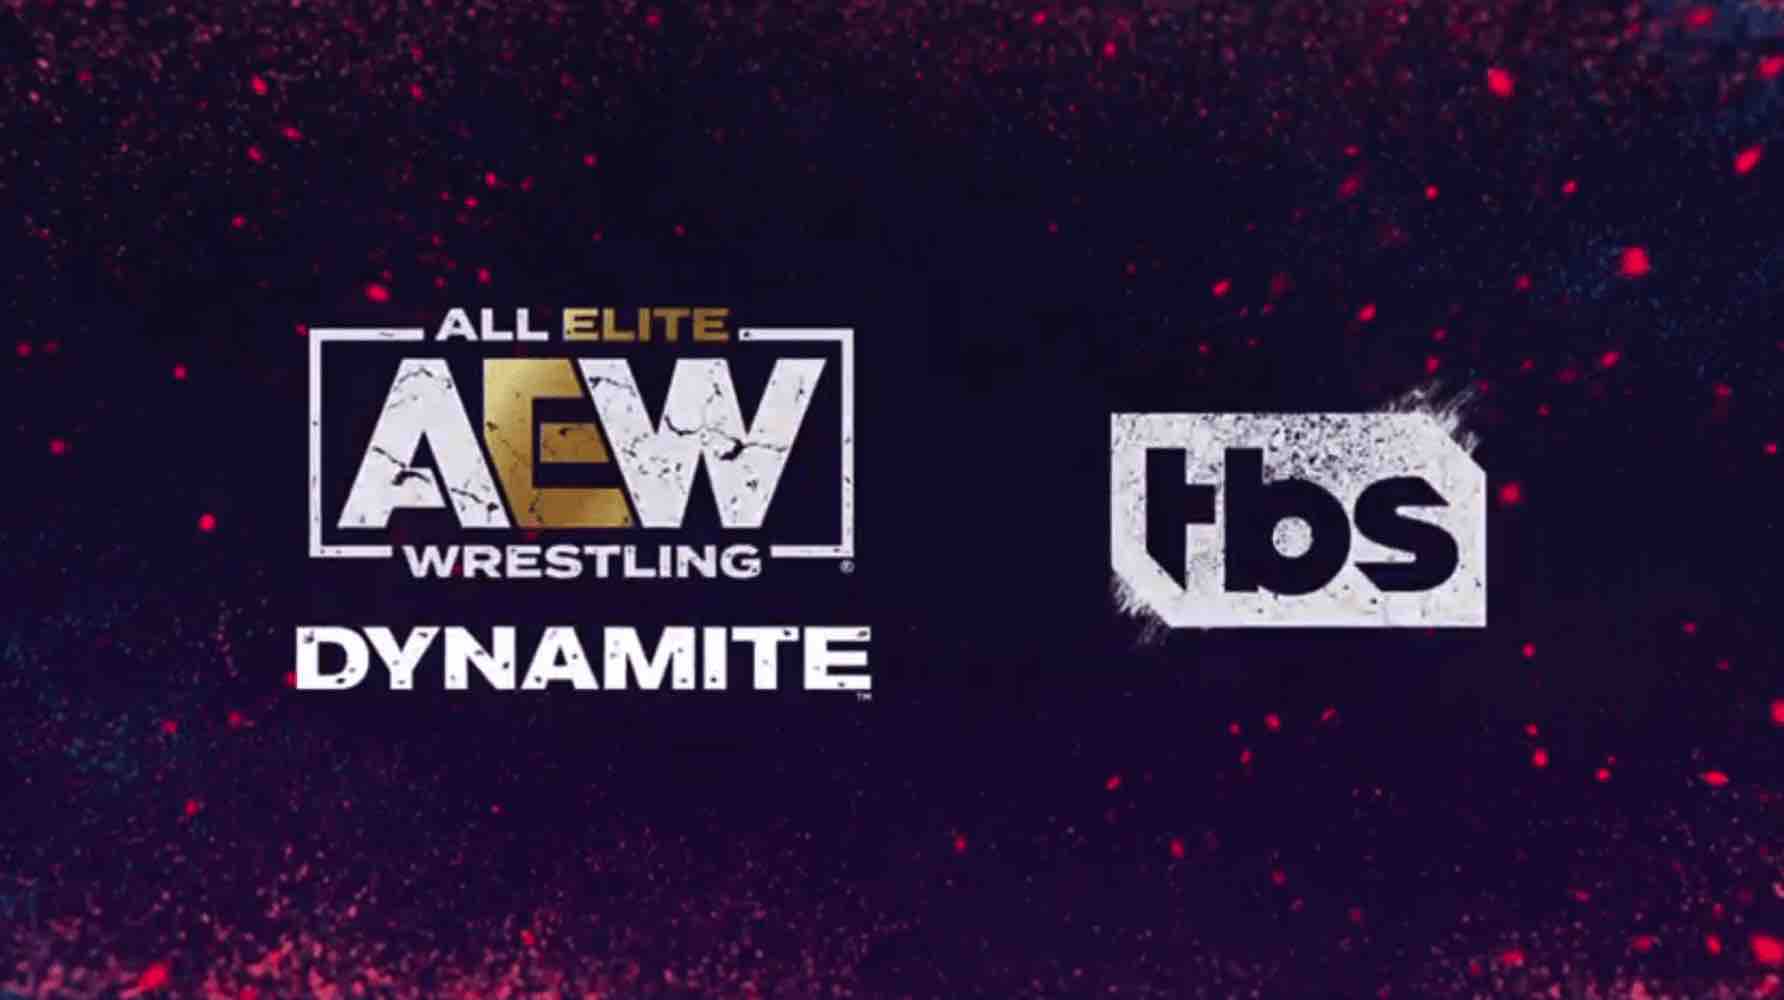 AEW Dynamite Preview for tonight